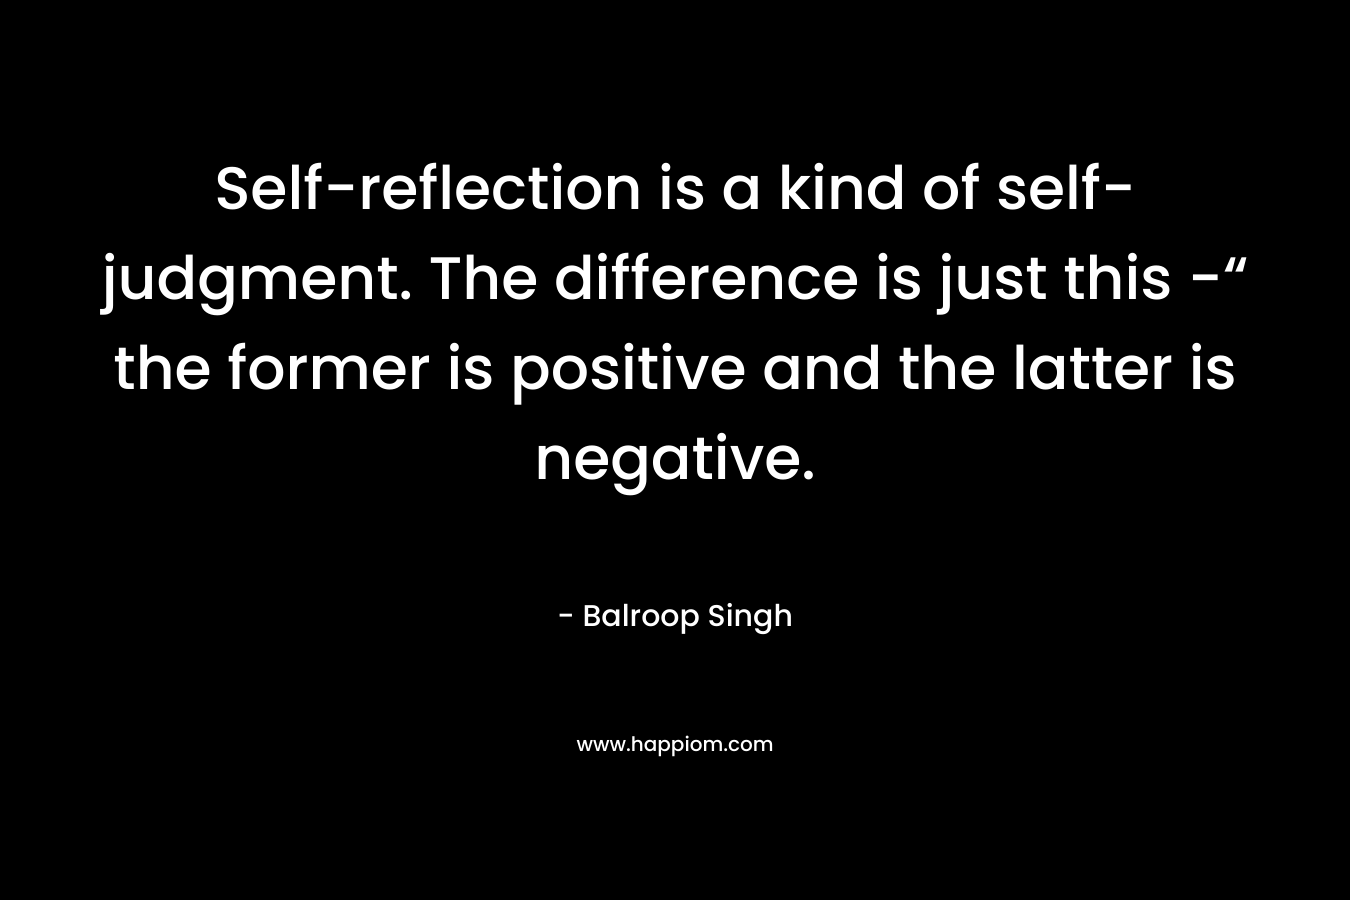 Self-reflection is a kind of self-judgment. The difference is just this -“ the former is positive and the latter is negative.